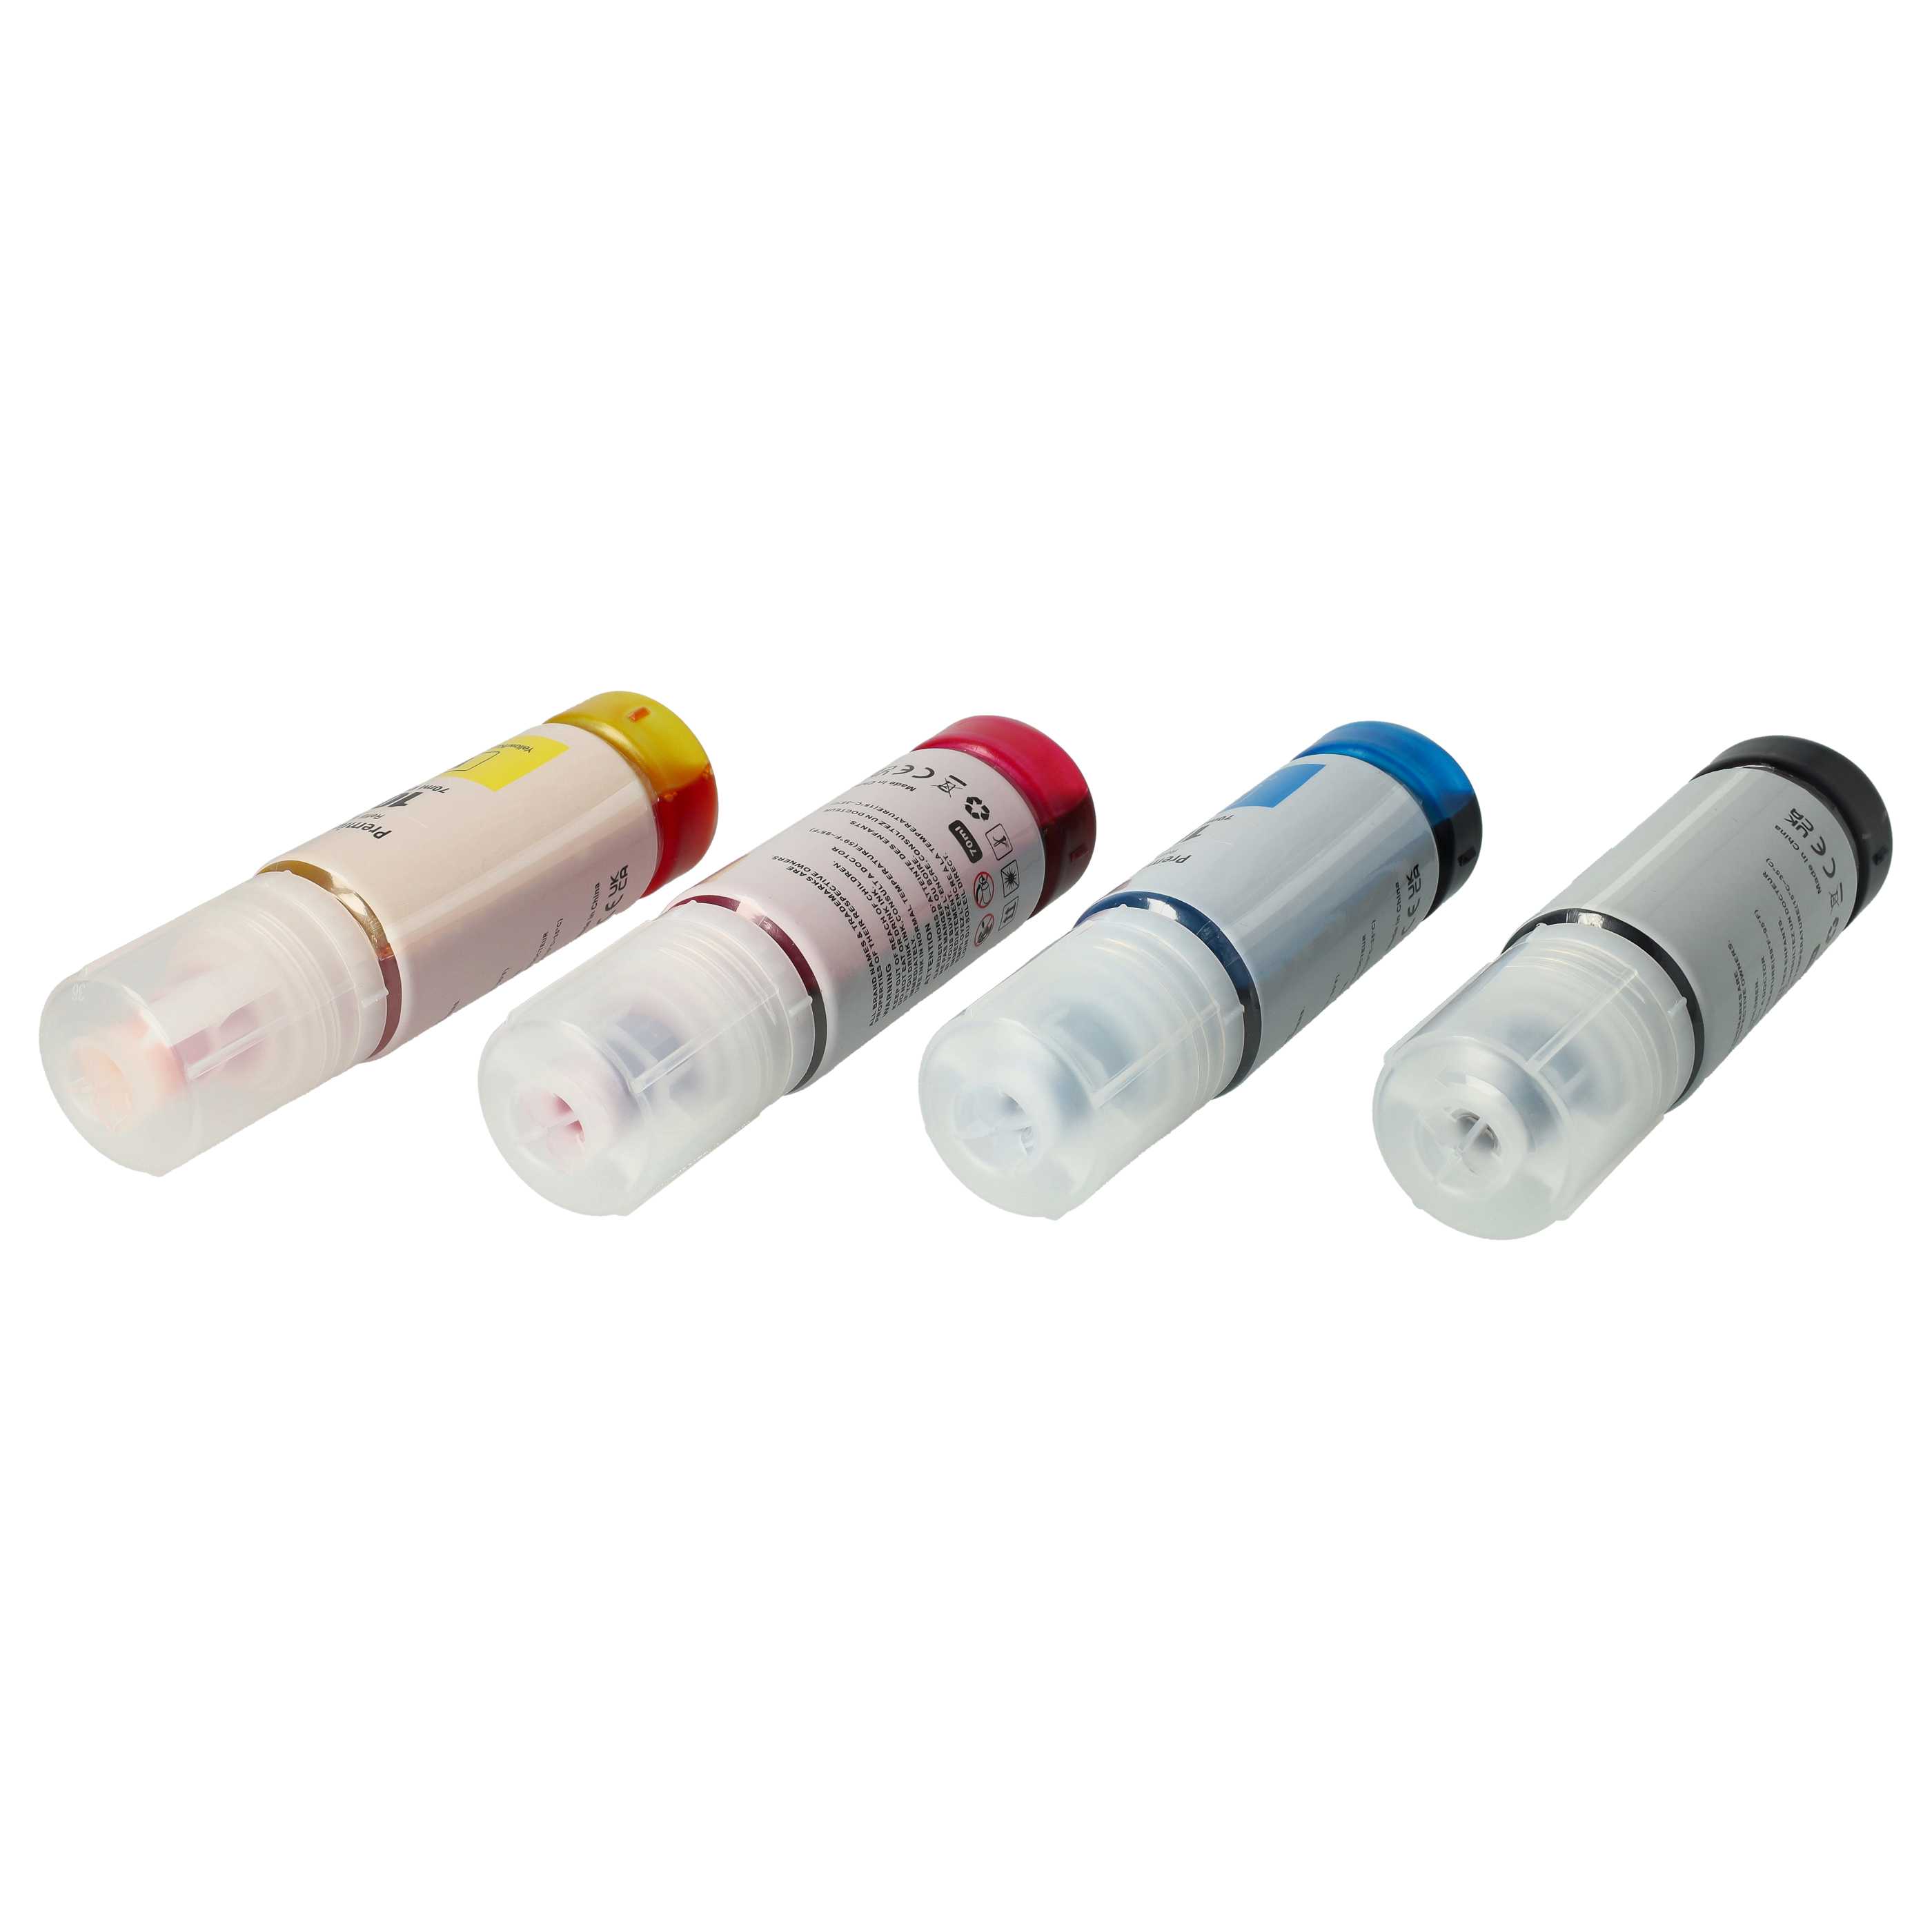 Refill Ink Coloured replaces Epson , , C13T03R340, C13T03R240, , 102 black for Epson Printer etc., 280 ml